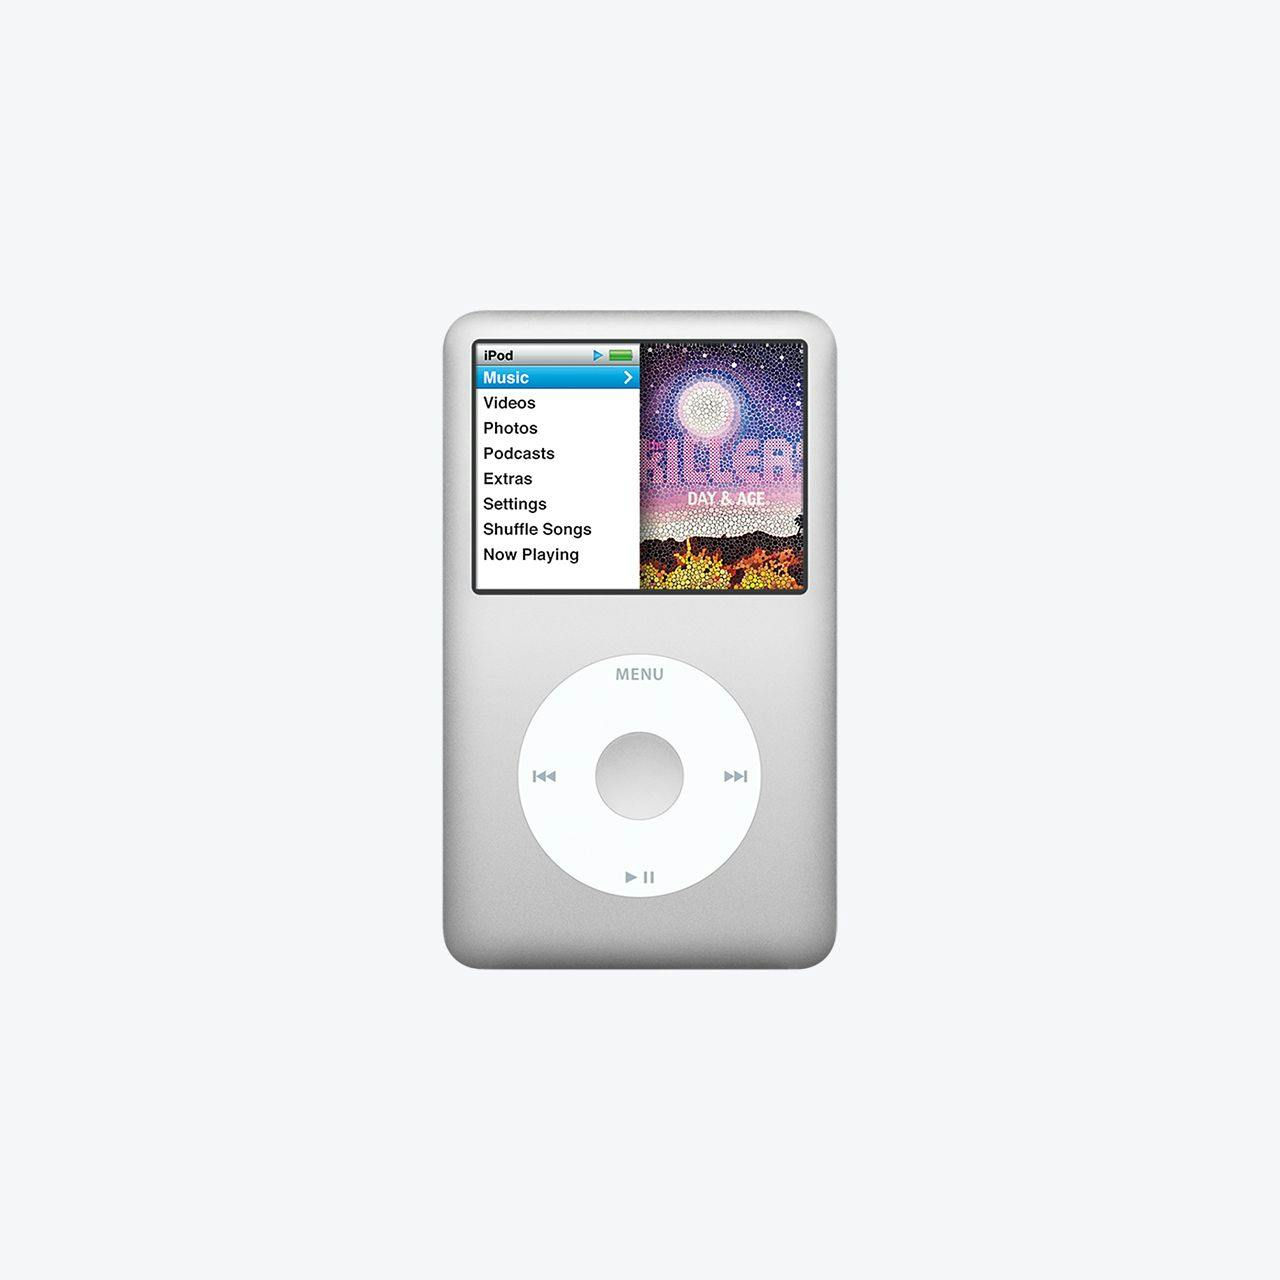 Image of a iPod Classic 7th Generation.